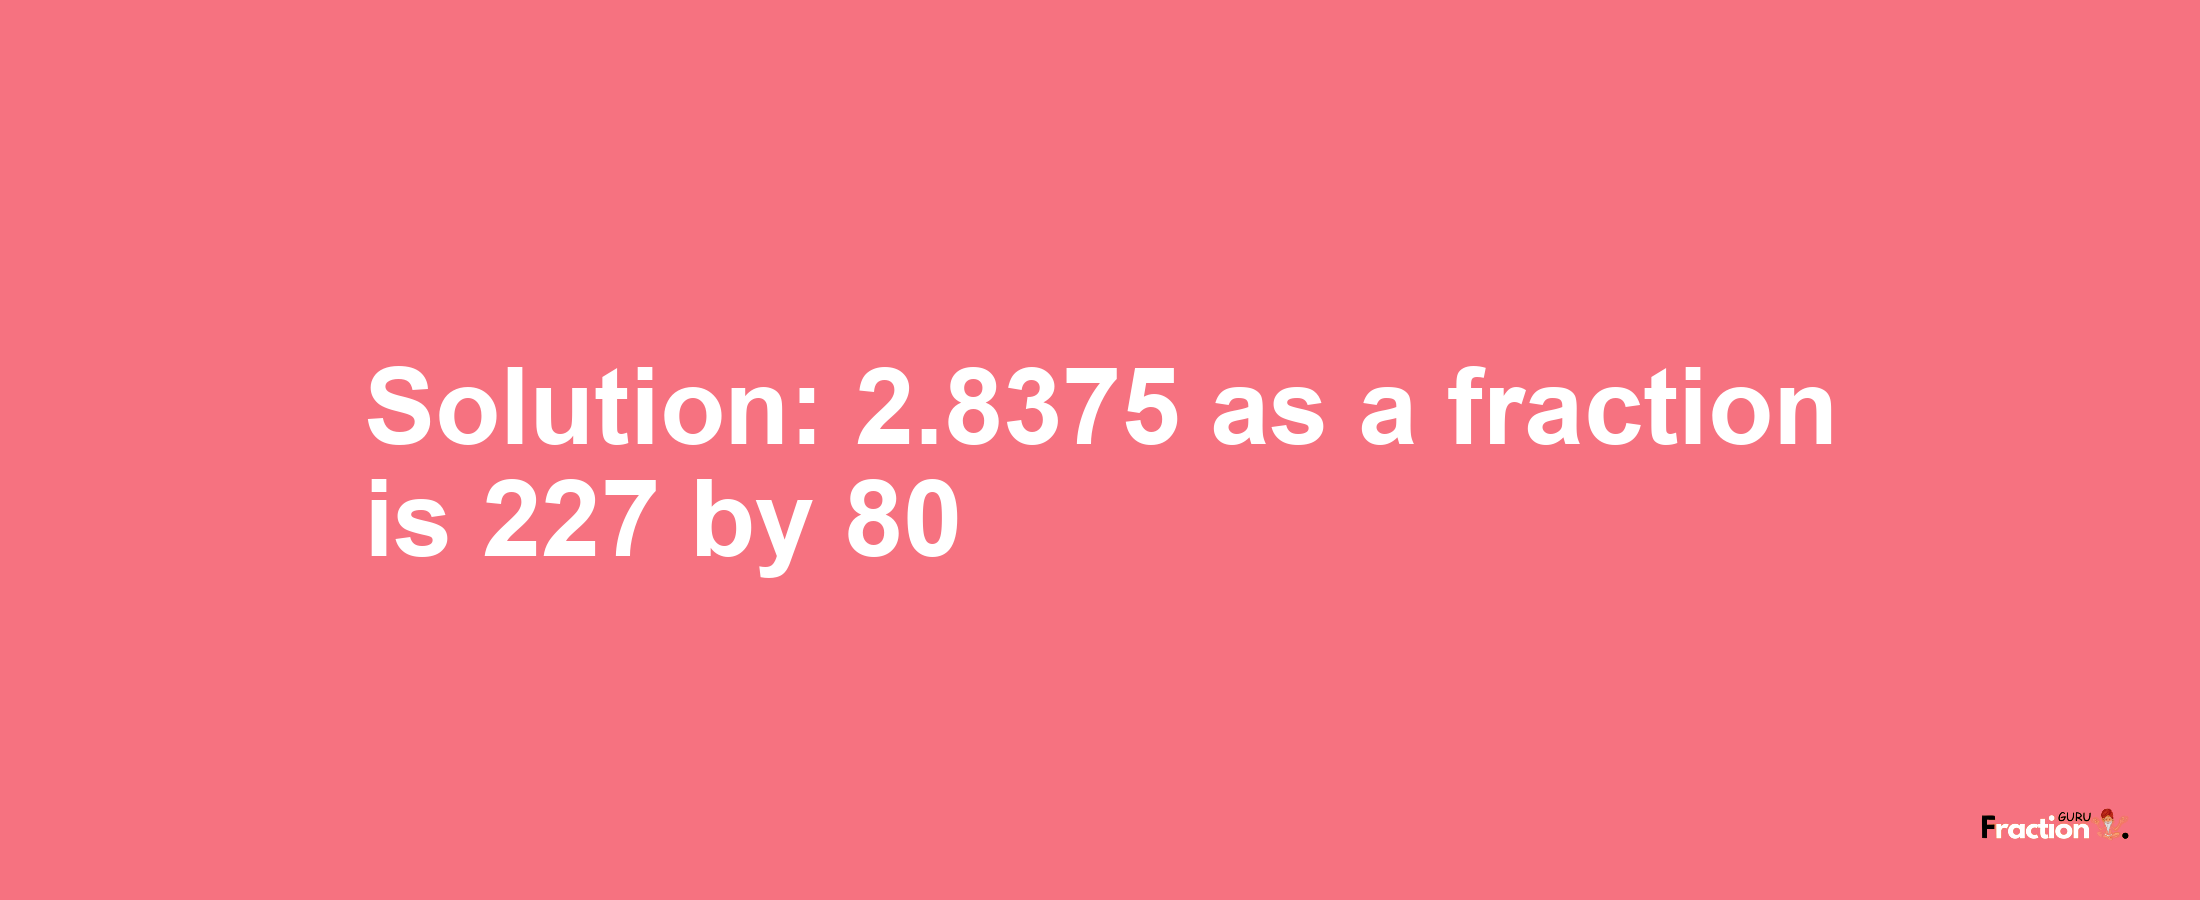 Solution:2.8375 as a fraction is 227/80